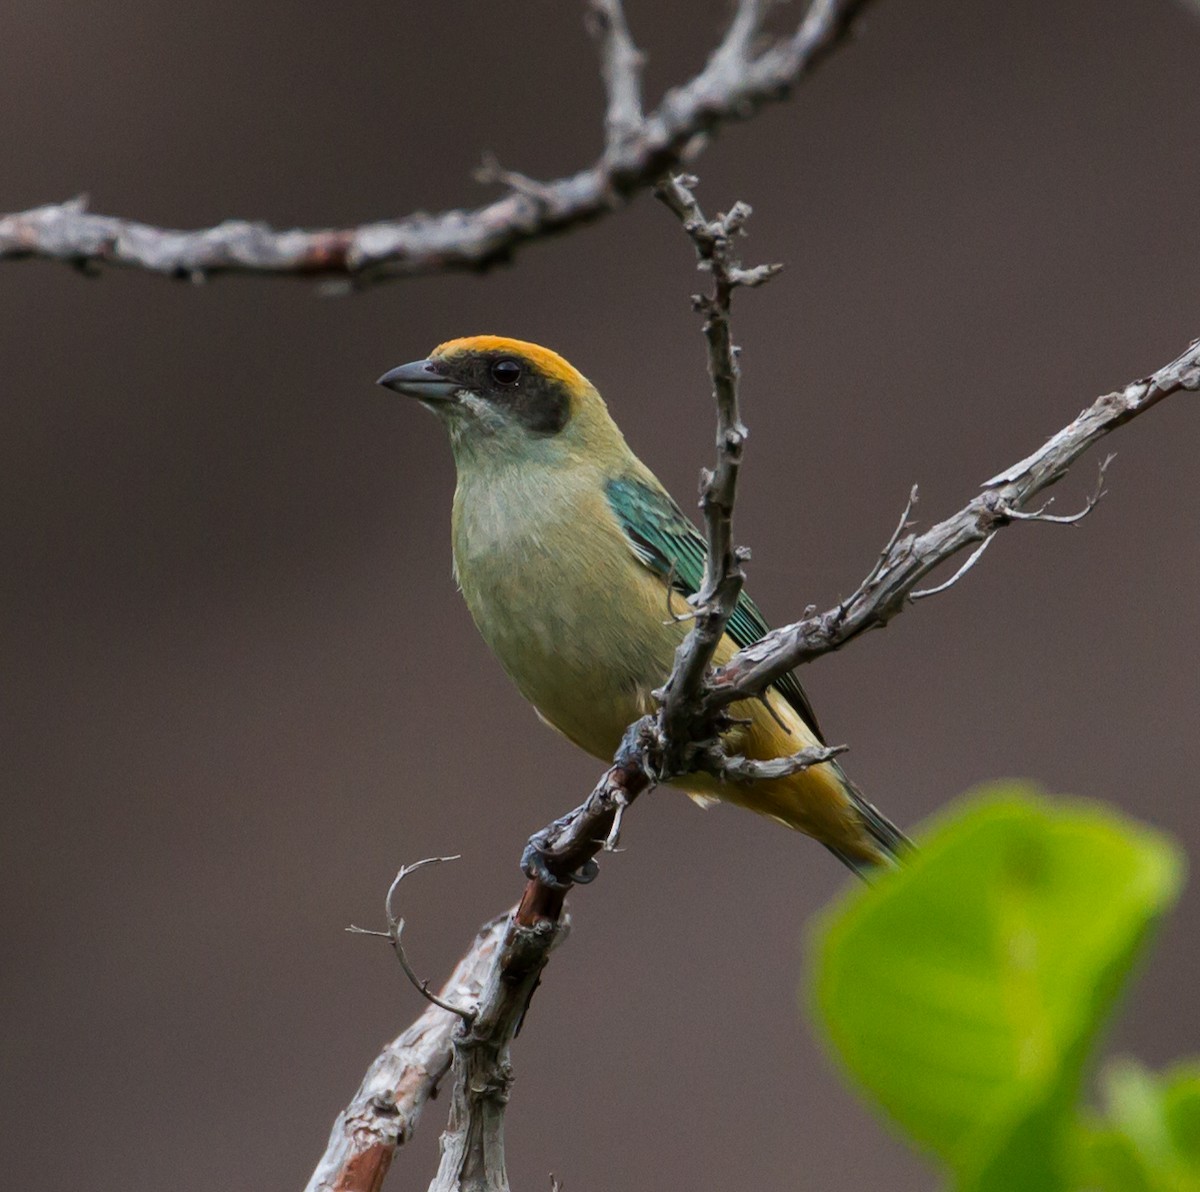 Burnished-buff Tanager - Cullen Hanks